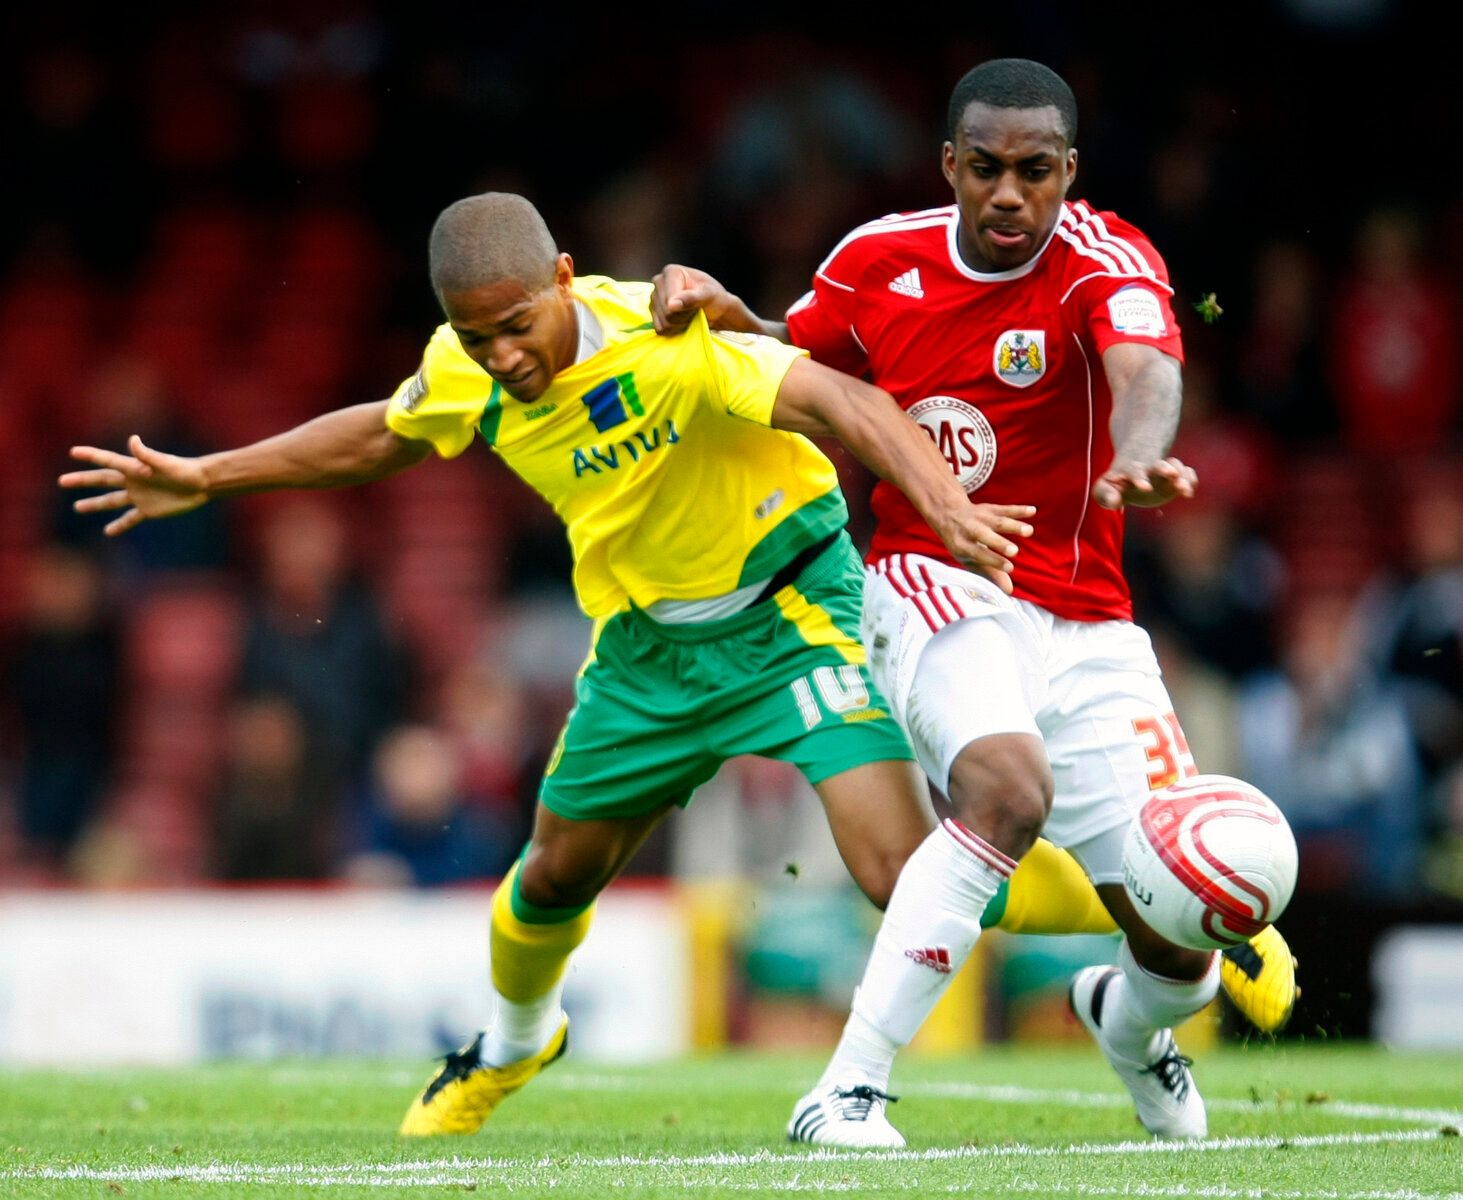 Football - Bristol City v Norwich City npower Football League Championship  - Ashton Gate - 10/11 - 2/10/10 
Norwich City's Simeon Jackson (L) in action with Bristol City's Danny Rose (R) 
Mandatory Credit: Action Images / James Benwell 
Livepic